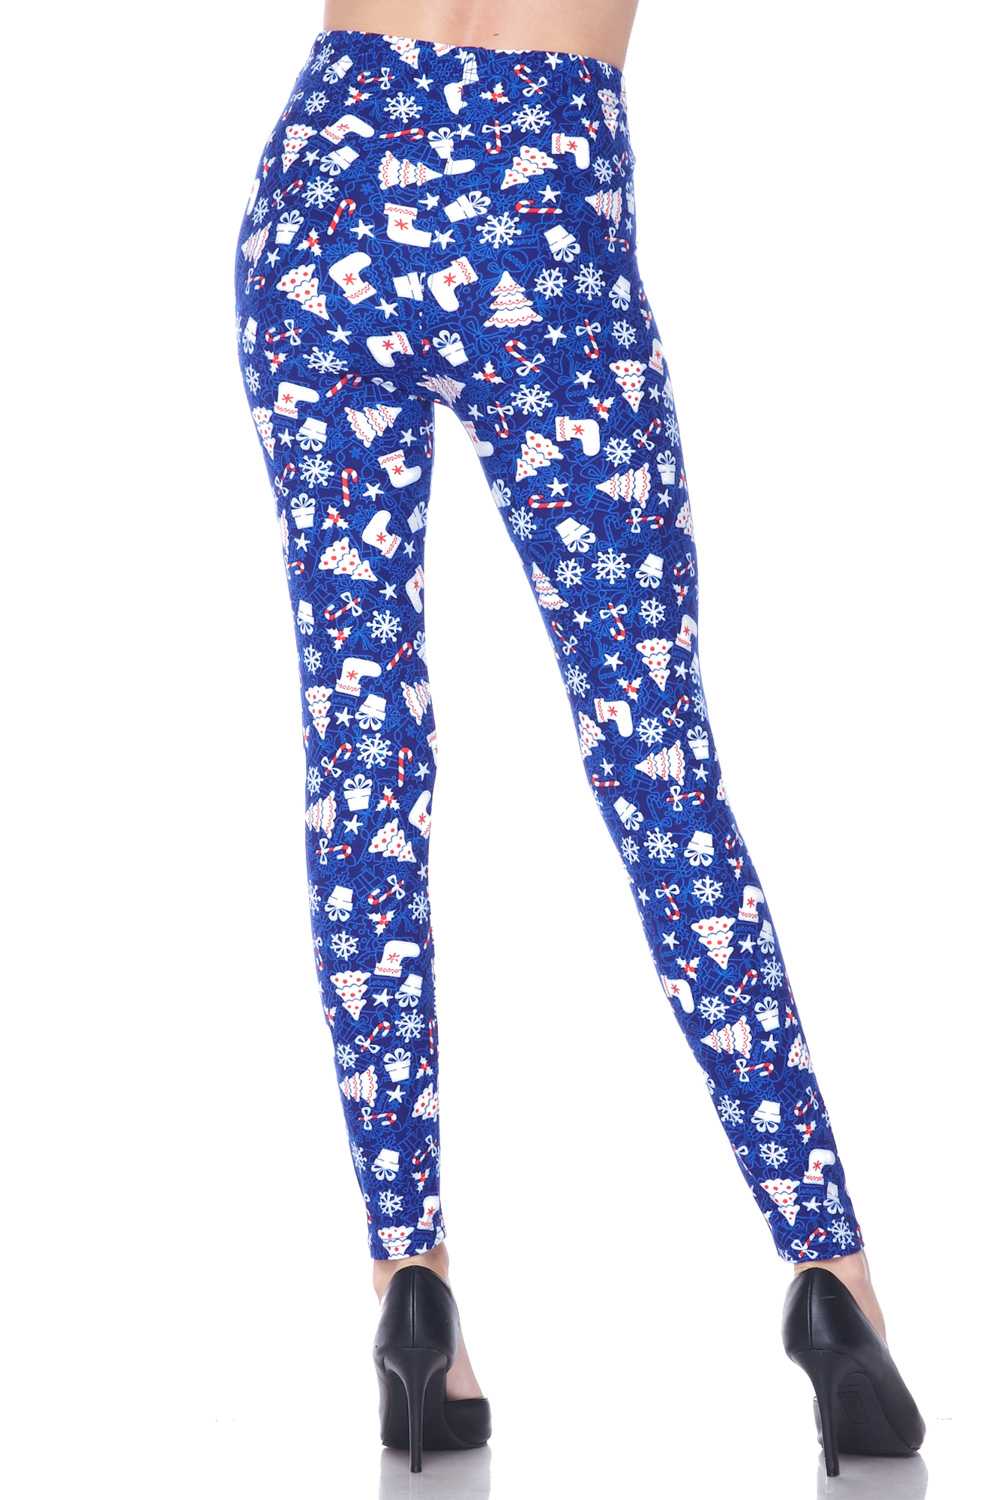 Snow Flakes And Gifts X-Mas Print Brushed Leggings - 1